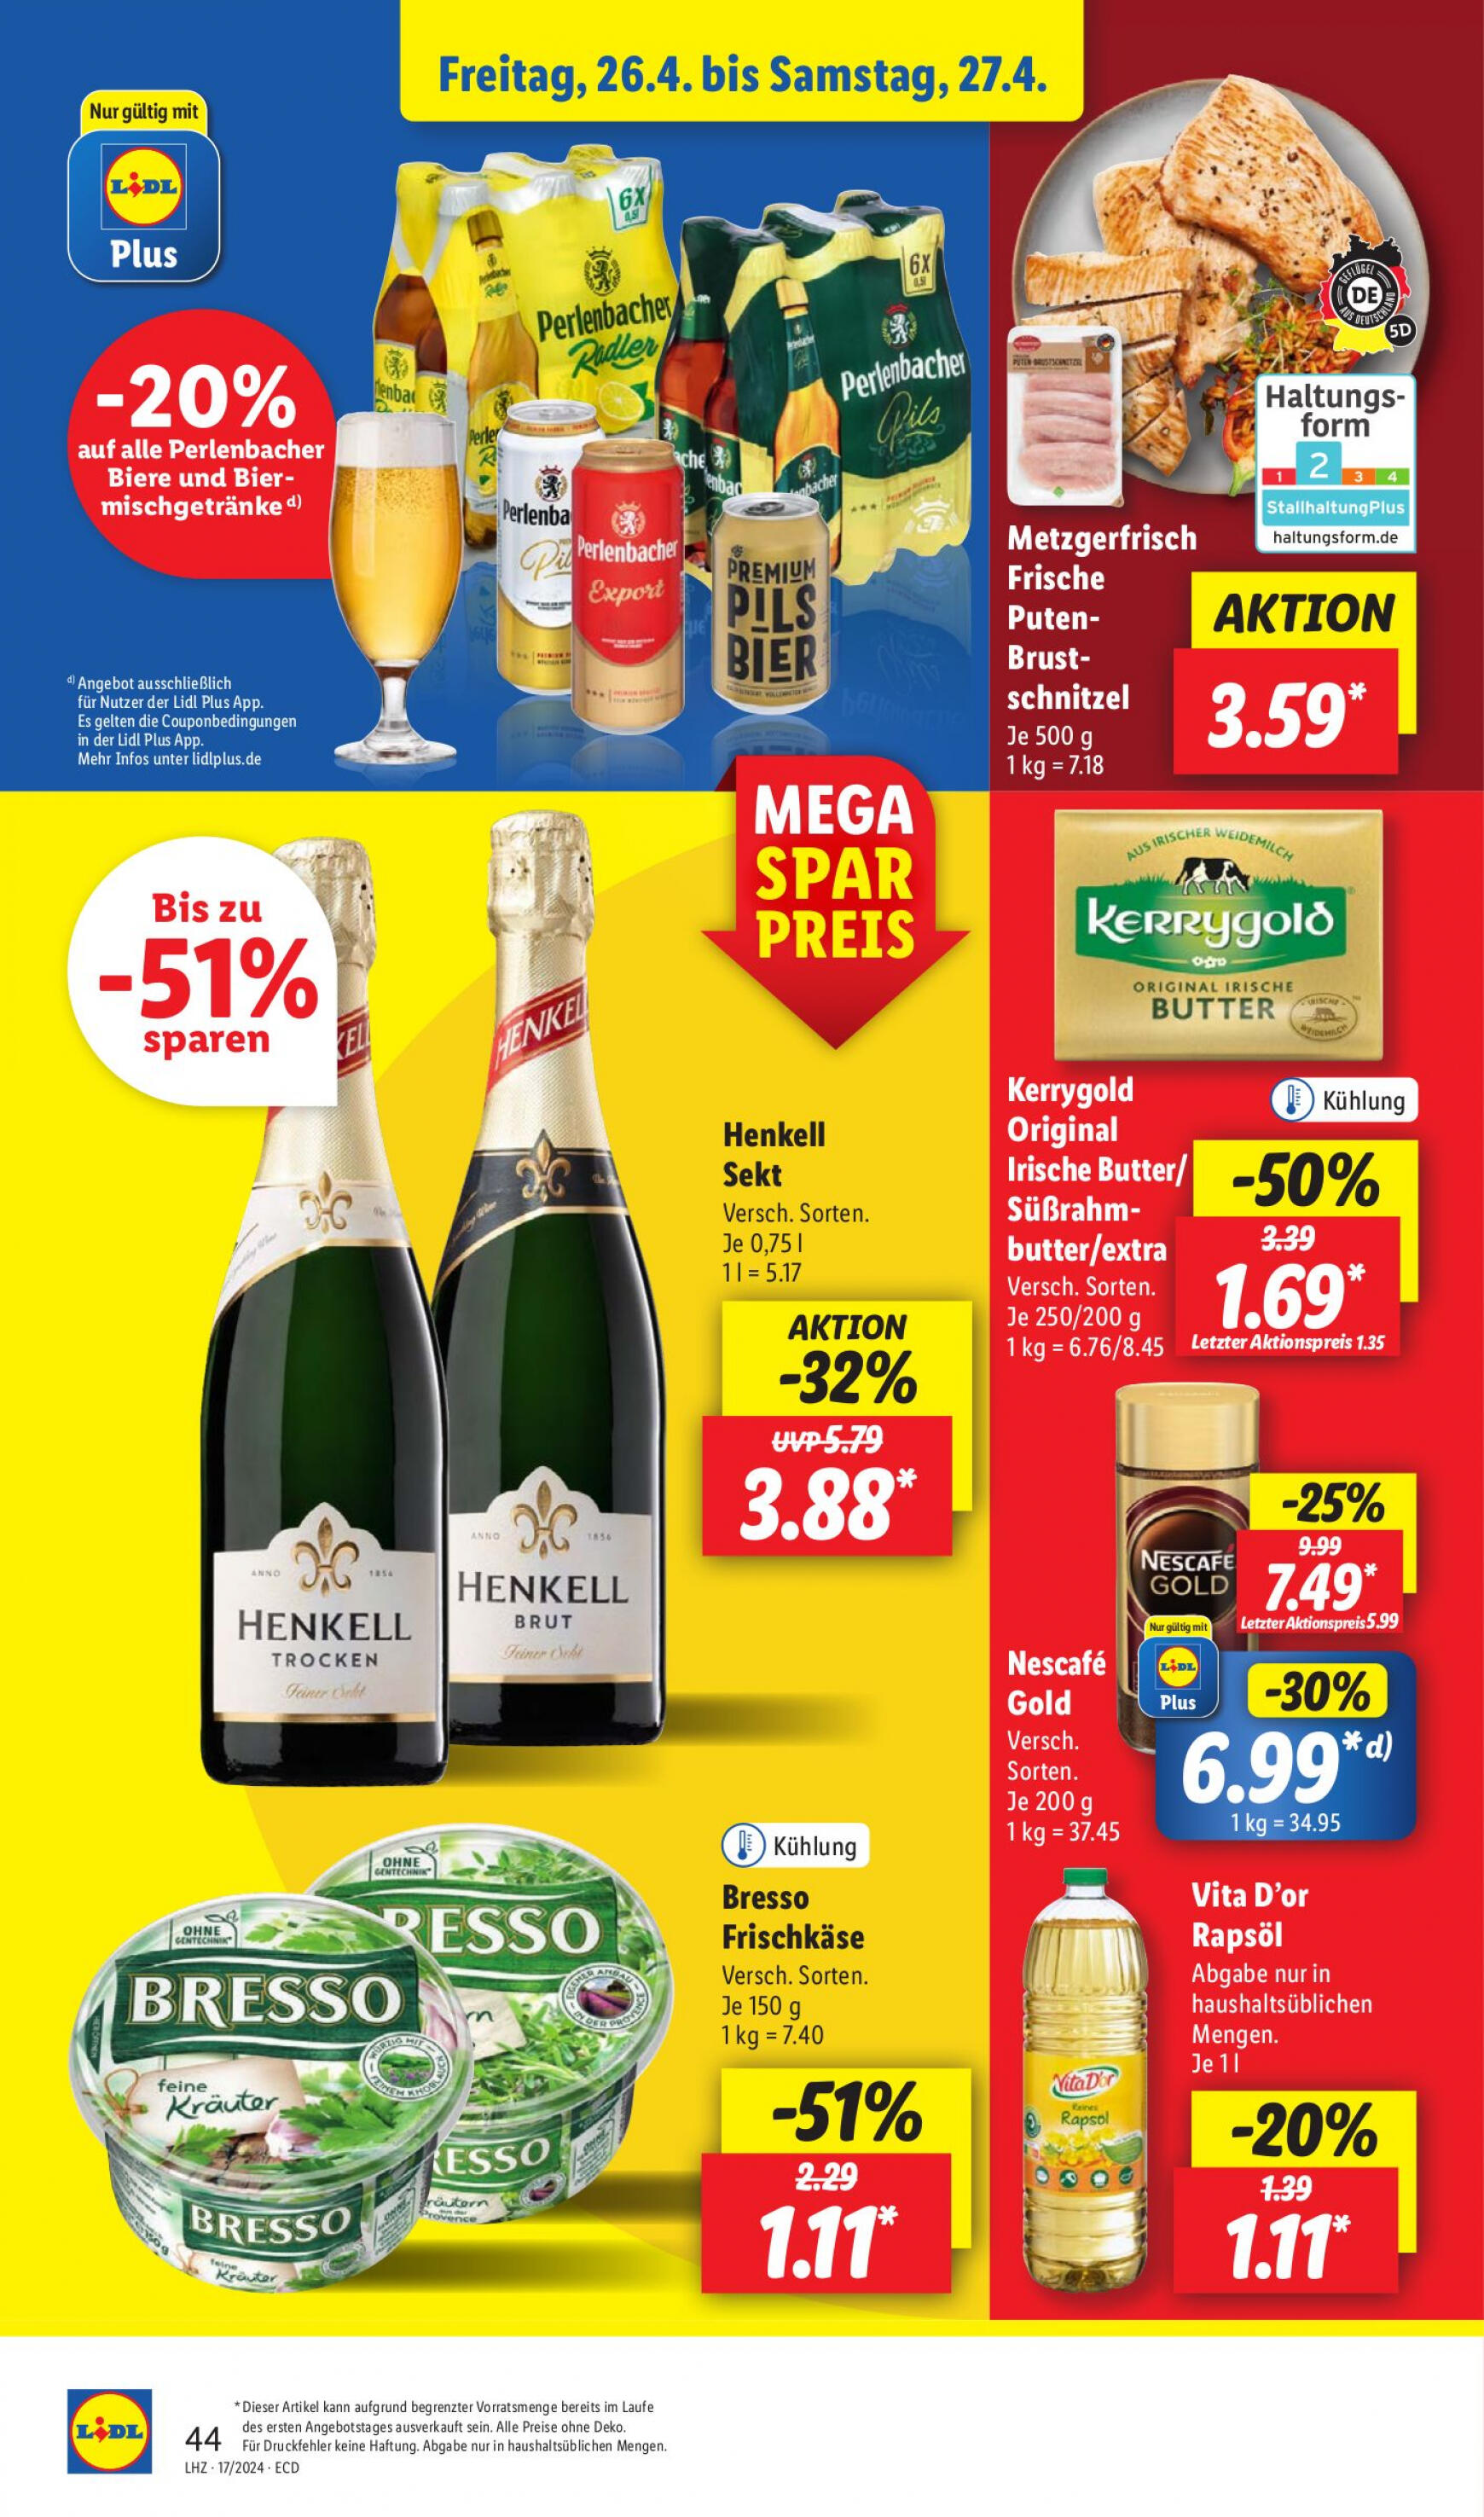 lidl - Flyer Lidl aktuell 22.04. - 27.04. - page: 54